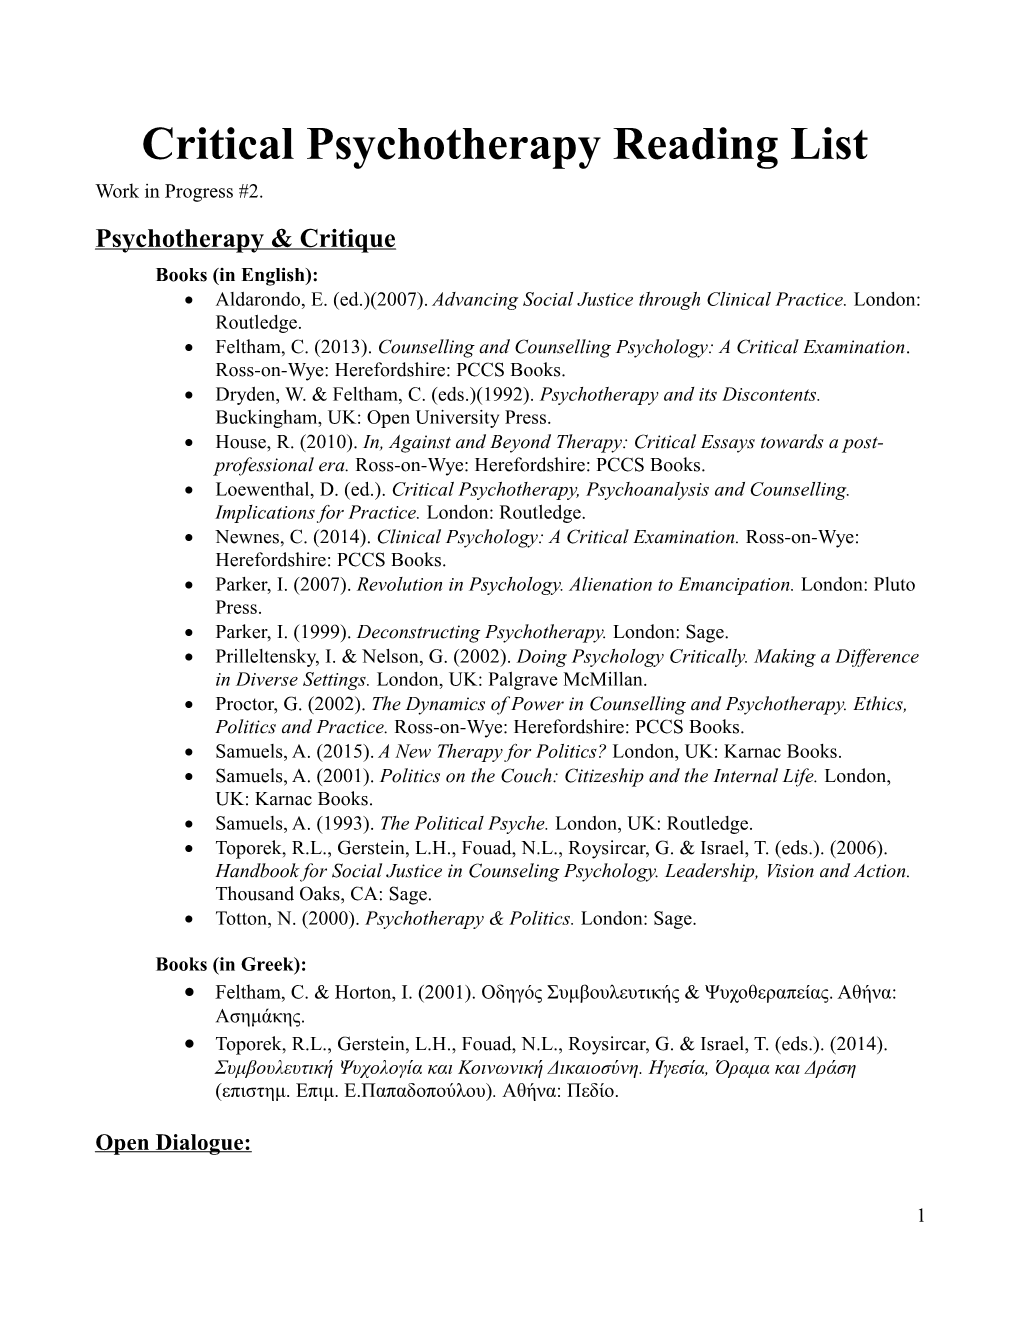 Critical Psychotherapy Reading List